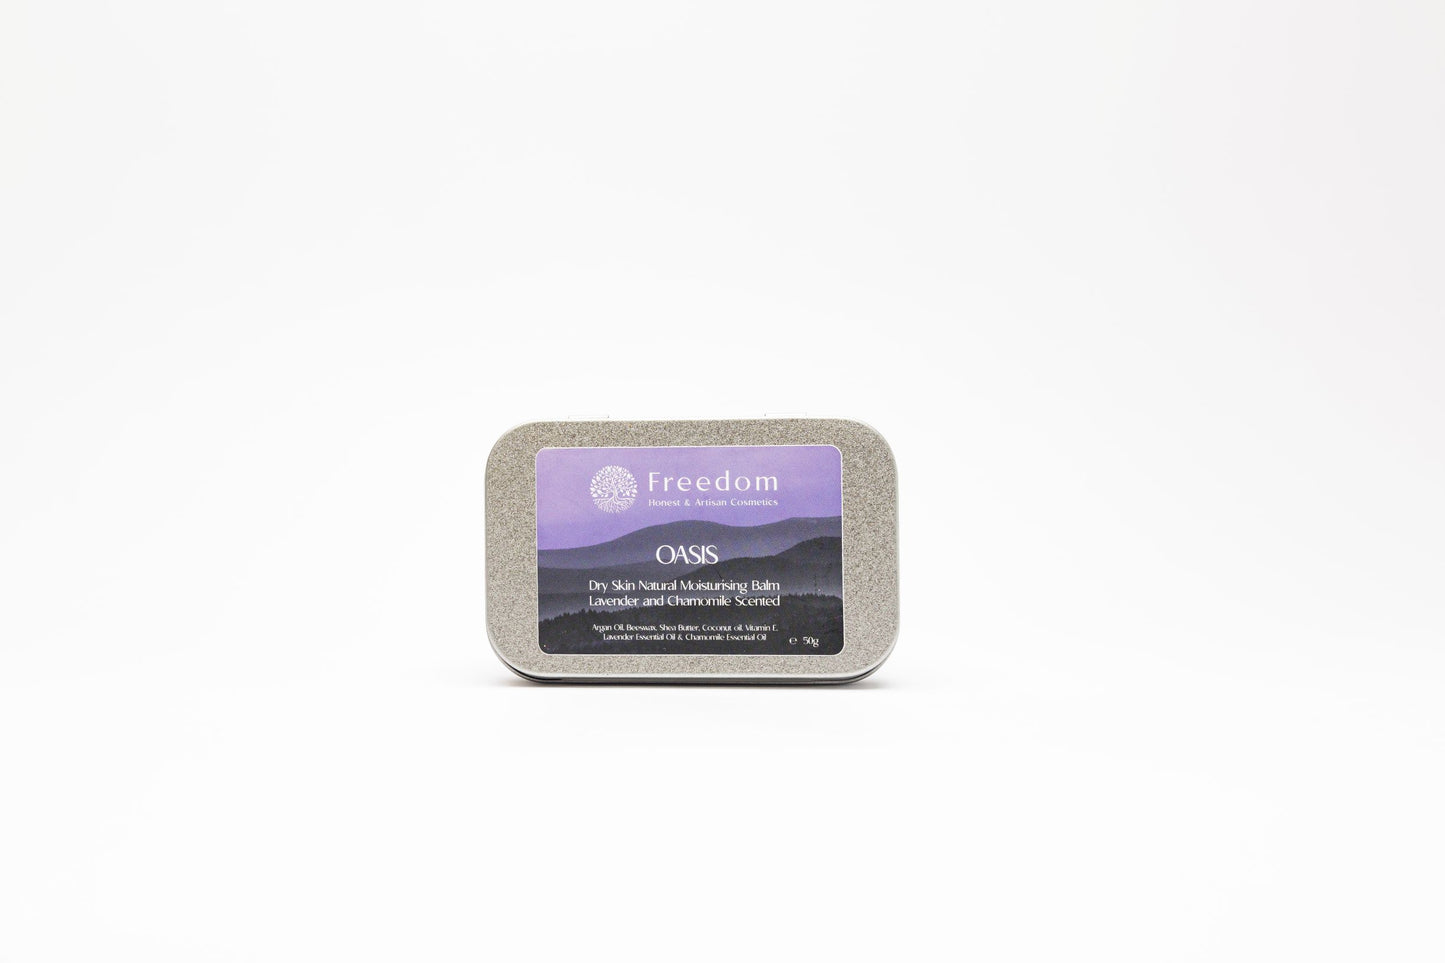 Oasis Dry skin Natural Moisturising Balm Lavender and Chamomile Scented